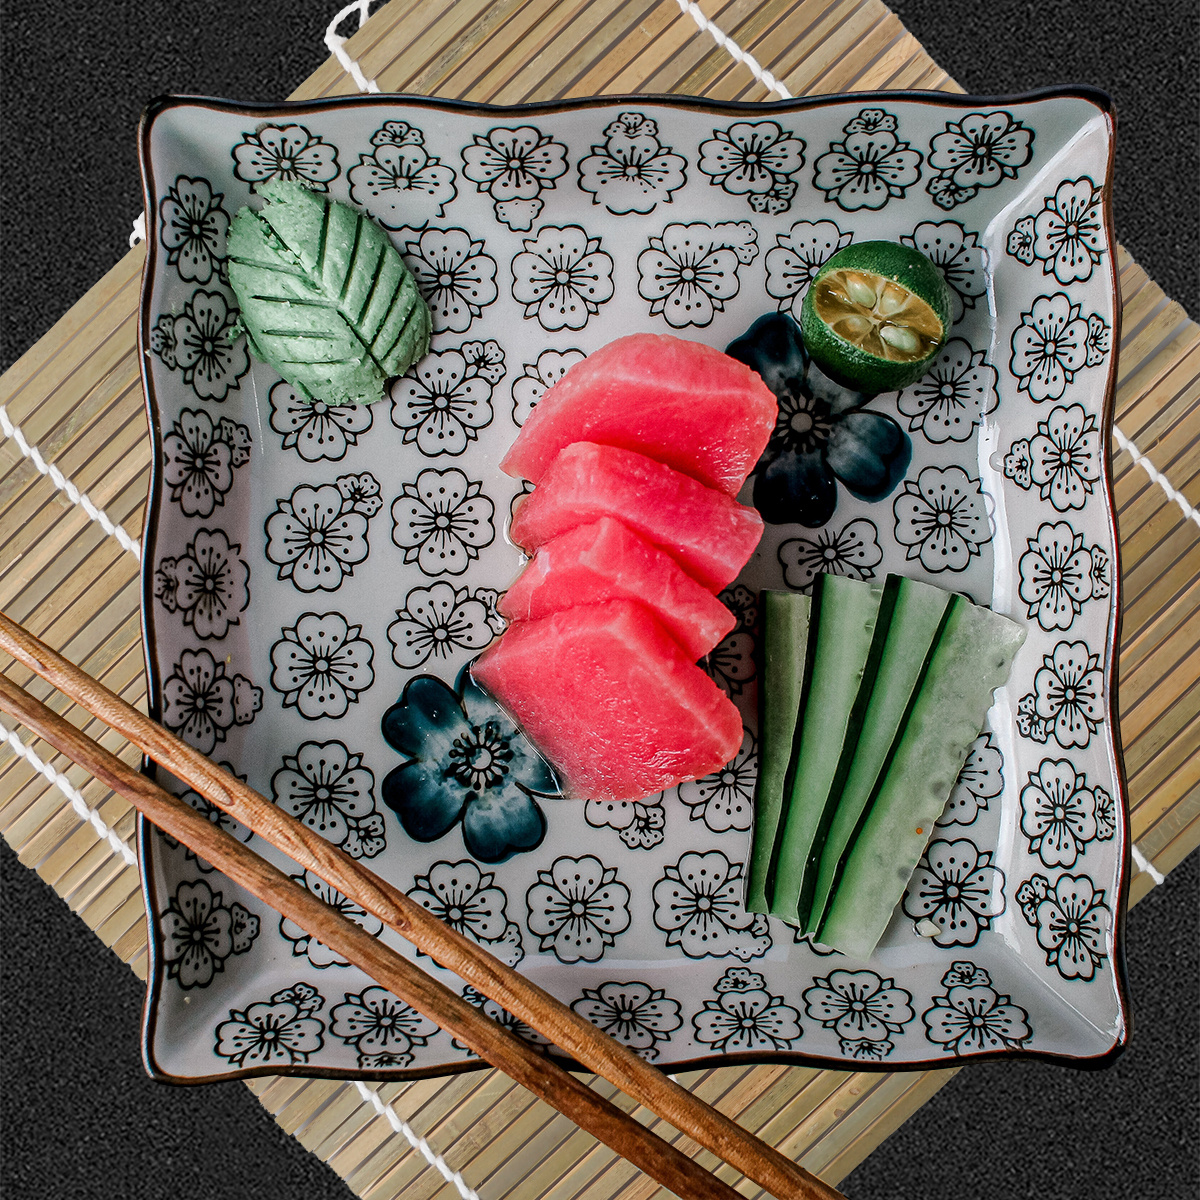 Essential Sushi Tools for the Kitchen